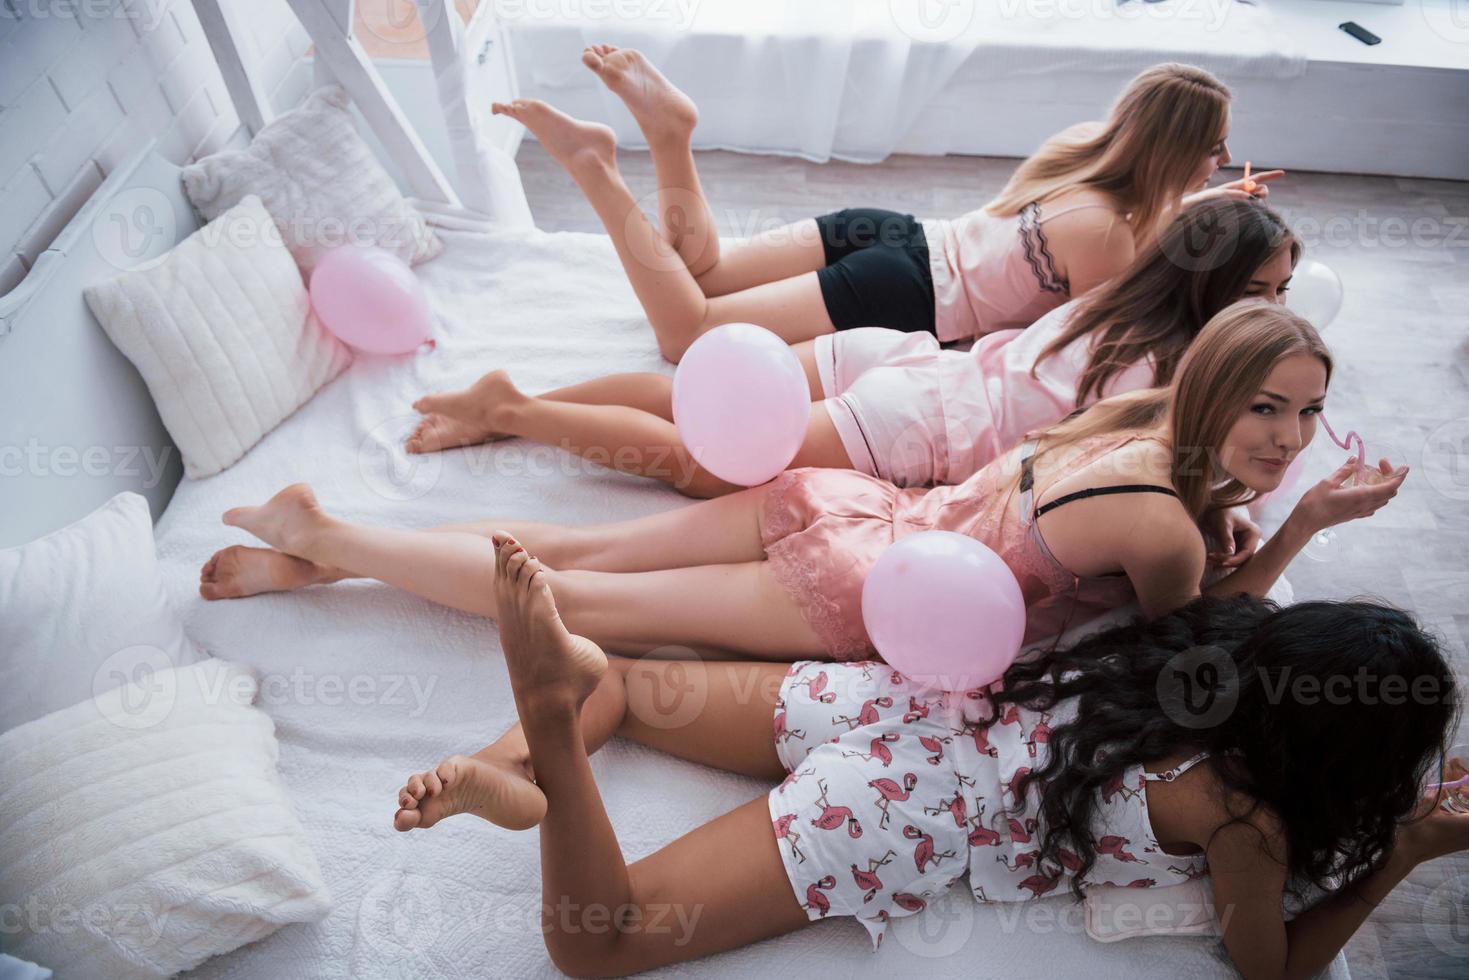 Holding a drinks. Young girls lying on luxury white bed have celebrating. Side and top view photo